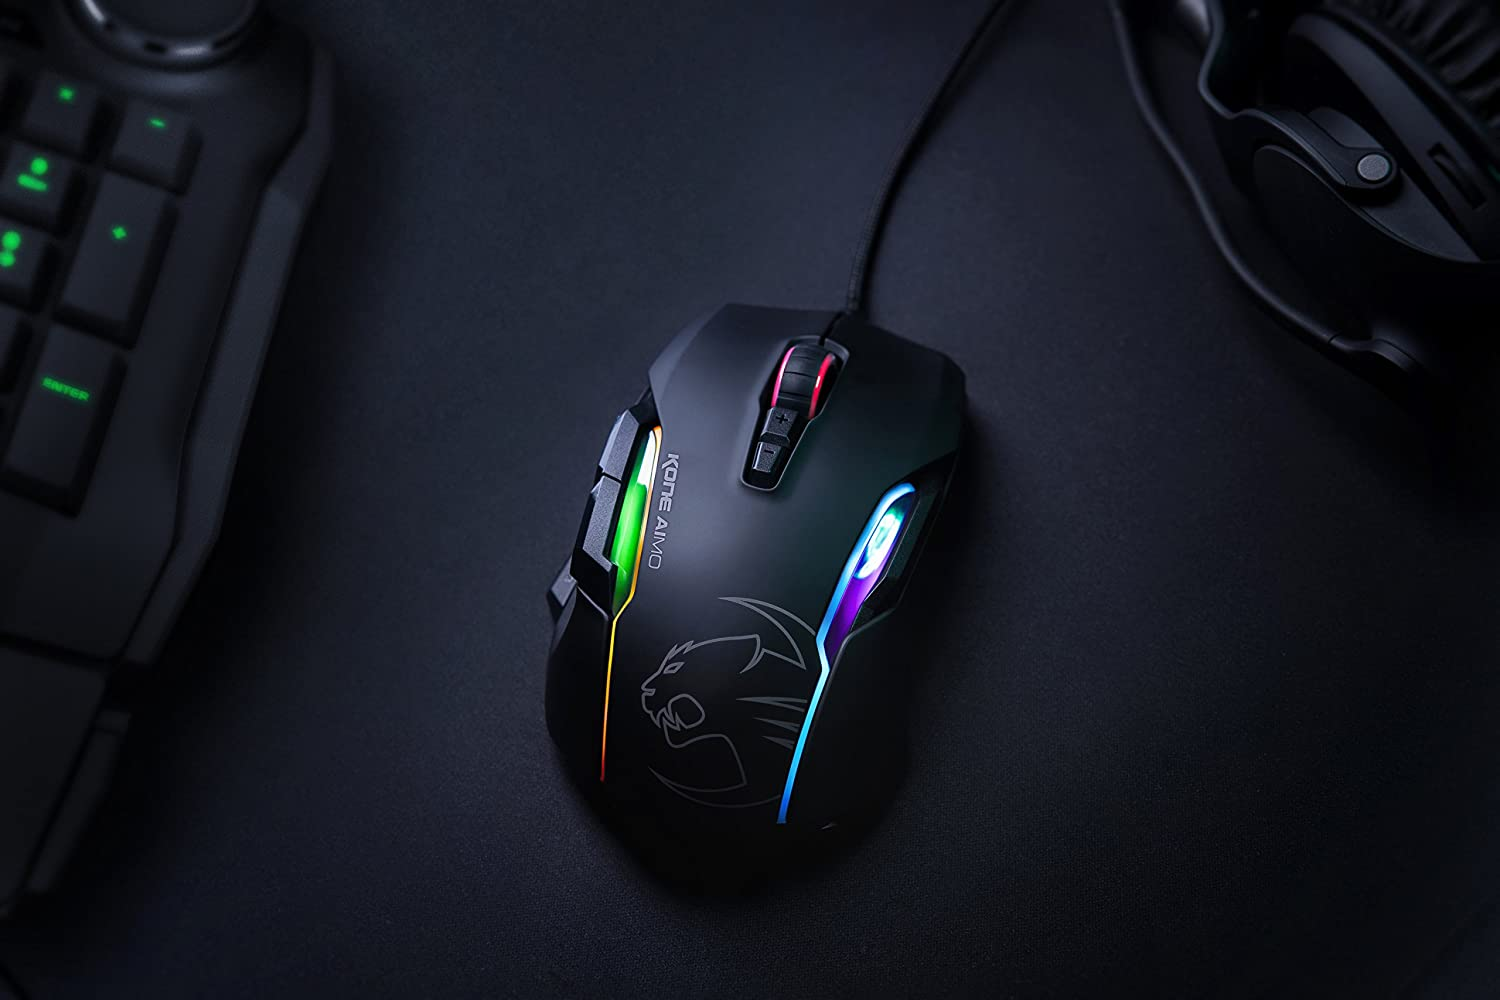 Lwzwigie Roccat Https://Youtu.be/Mfk3Bmiiu8C Roccat® Swarm Powered – Comprehensive Driver Suite With A Striking Design And A Stunning Feature Set, The Kone Aimo Channels The Legacy Of Its Predecessor. It Boasts Refined Ergonomics With Enhanced Button Distinction, But What Truly Sets It Apart Is Its Rgba Double Lightguides Powered By The State-Of-The-Art Aimo Intelligent Lighting System. Aimo Is The Vivid Illumination Eco-System From Roccat®. Its Functionality Grows Exponentially Based On The Number Of Aimo-Enabled Devices Connected. It Also Reacts Intuitively And Organically To Your Computing Behavior. Eliminating The Need For Configuration, It Presents A State-Of-The-Art Lighting Scenario Right Out Of The Box, For A Completely Fluid, Next-Gen Experience. The Kone Aimo Features A Tri-Button Thumb Zone For A New And Even Greater Level Of Control. It Includes Two Wide Buttons Suitable For All Hand Sizes, Plus An Ergonomic Lower Button Set To Easy-Shift[+]™ By Default. Easy-Shift[+]™ Is The World-Famous Button Duplicator Technology That Lets You Assign A Secondary Function To The Mouse'S Buttons. It'S Easy To Program And Has Options For Simple Commands And Complex Macros. Roccat - ماوس ألعاب مخصص ذكي من Kone Aimo Rgba (أسود) 23 مفتاحًا قابلًا للبرمجة ، مصمم في ألمانيا